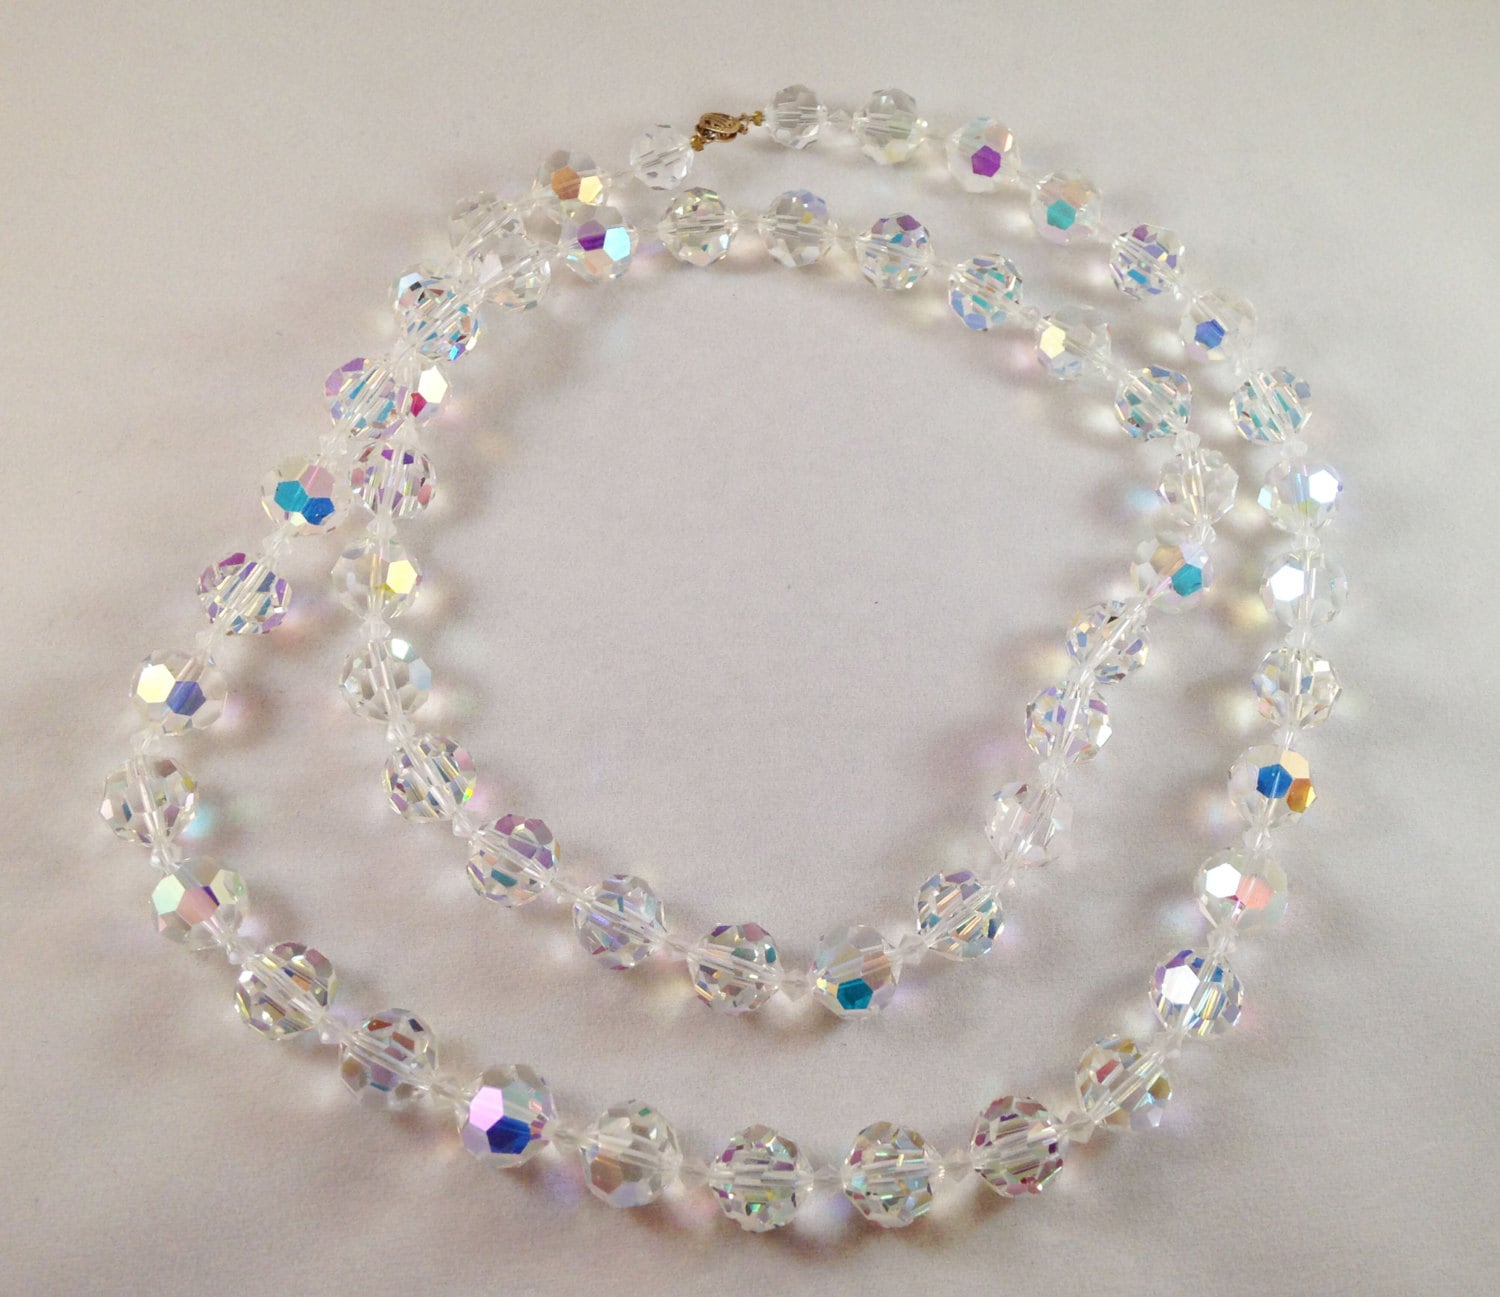 Vintage Clear Crystal Bead Necklace by TreasuresOnBroadway on Etsy